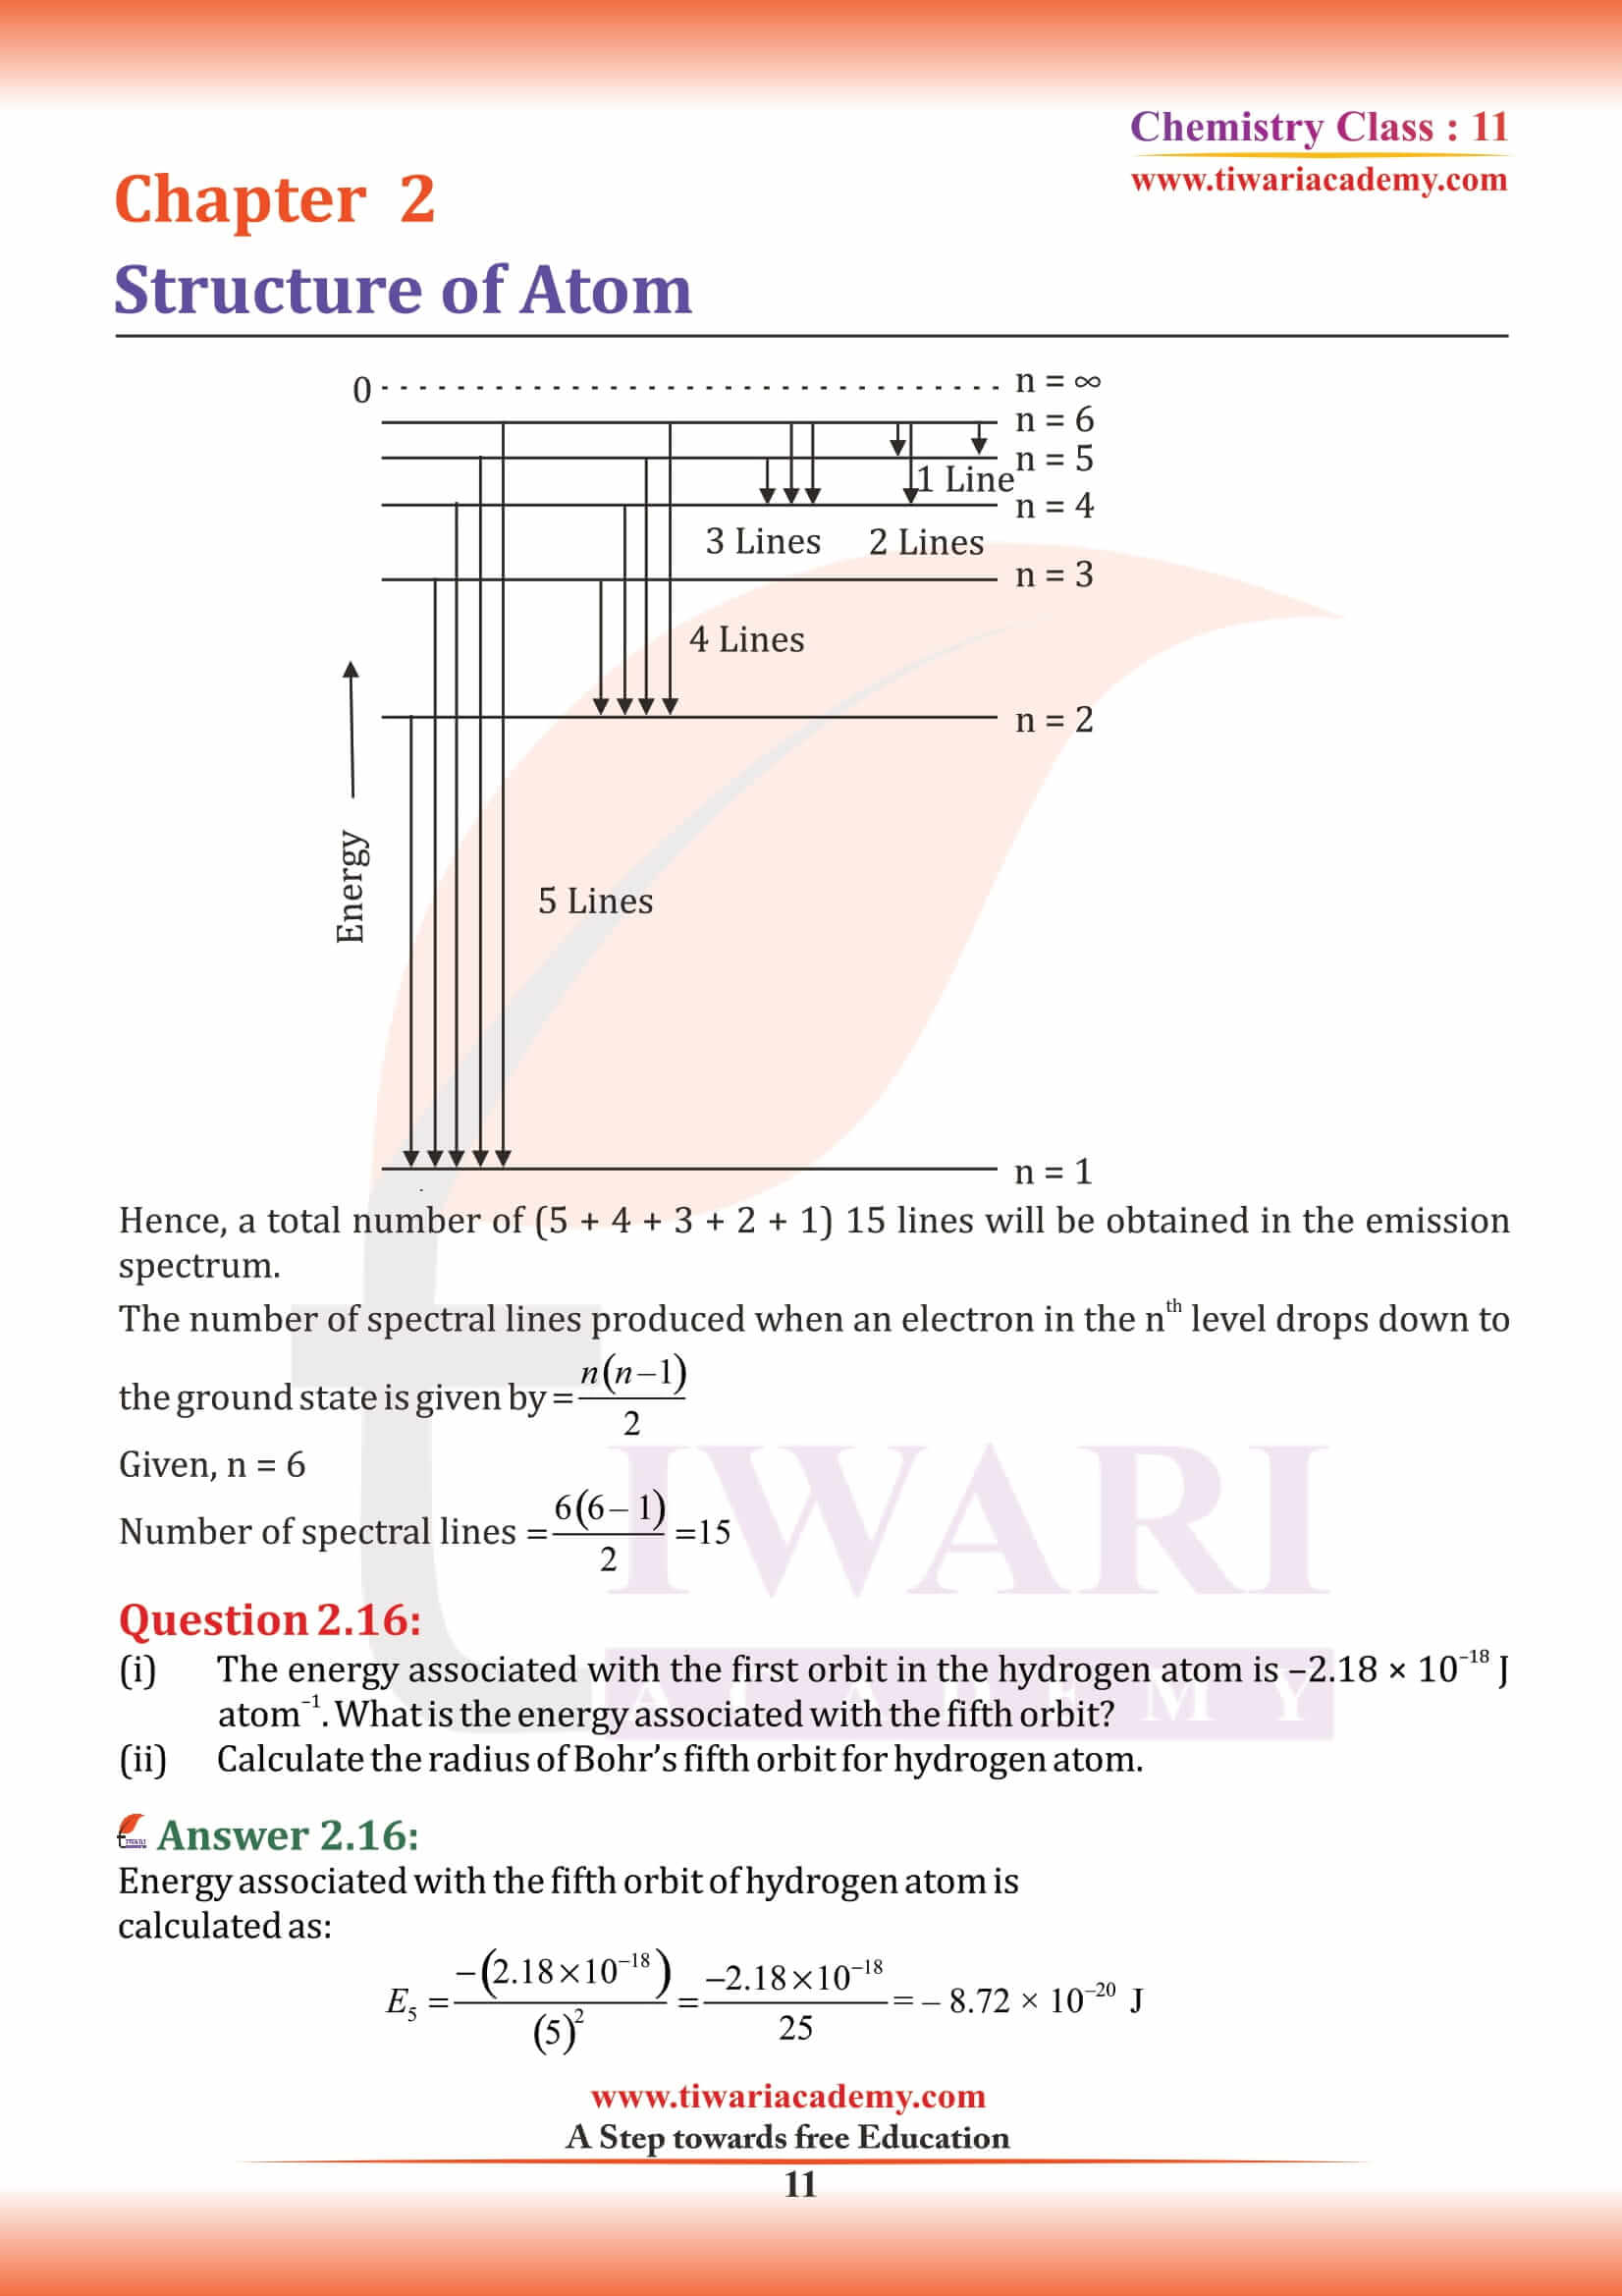 NCERT Solutions for Class 11 Chemistry Chapter 2 all answers